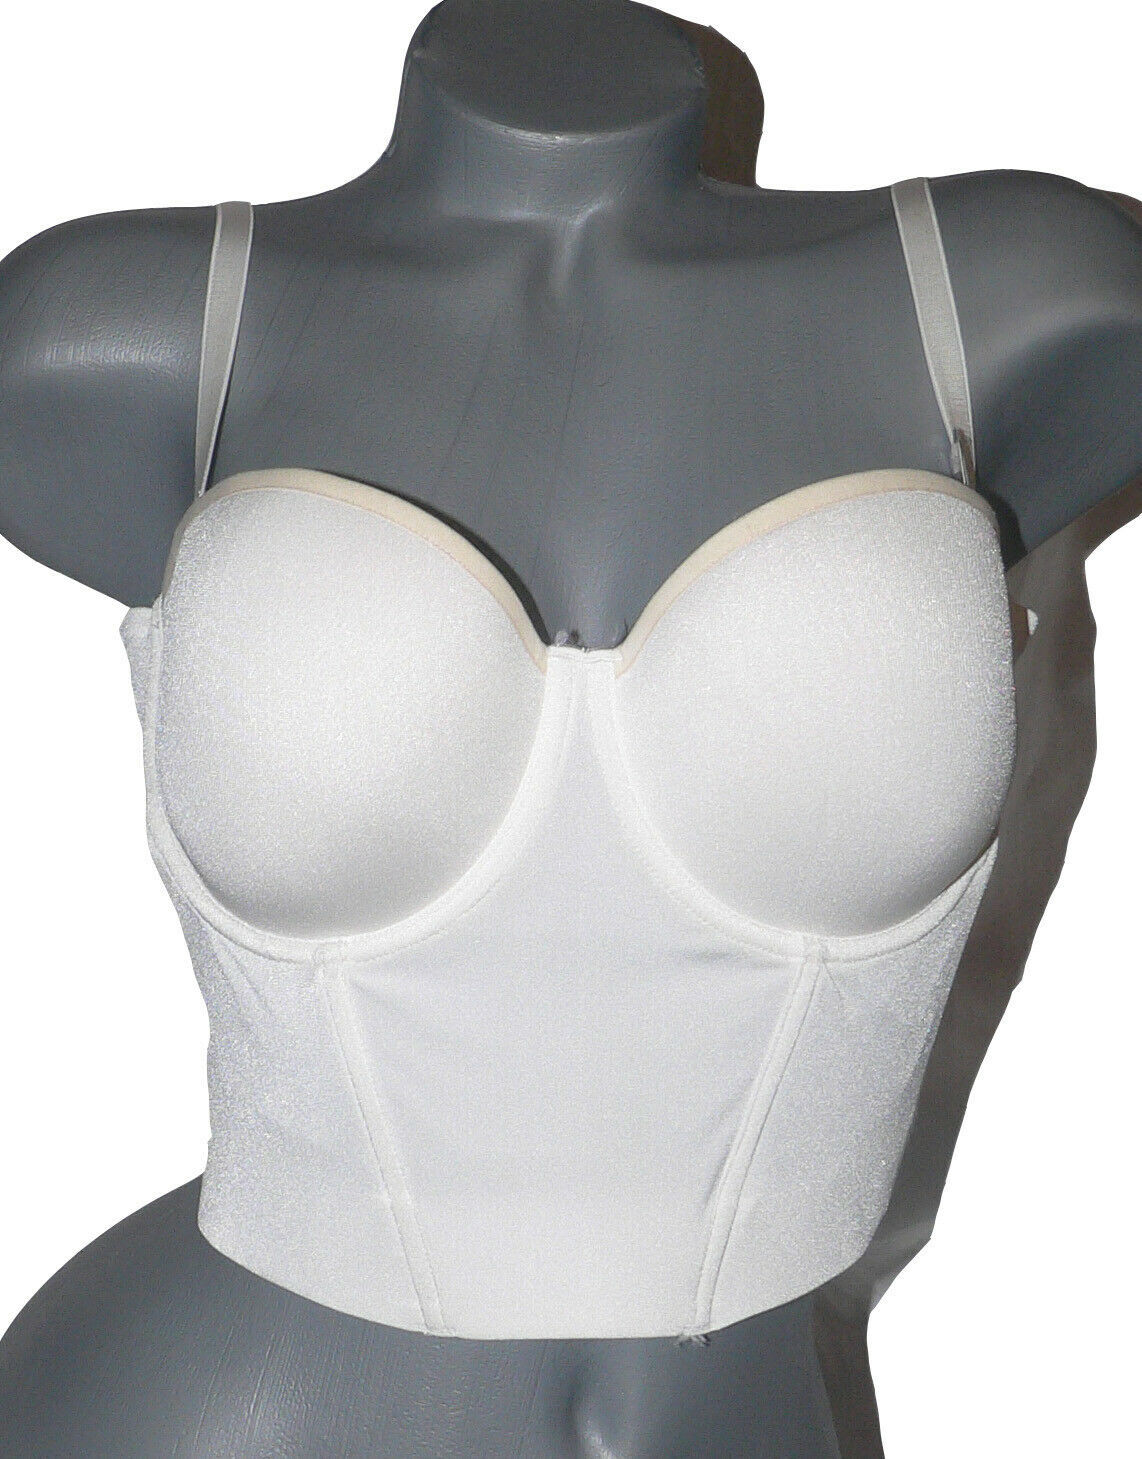 Primary image for NWT LE MYSTERE 38 B Soiree low back Bustier bra bridal strapless convertible